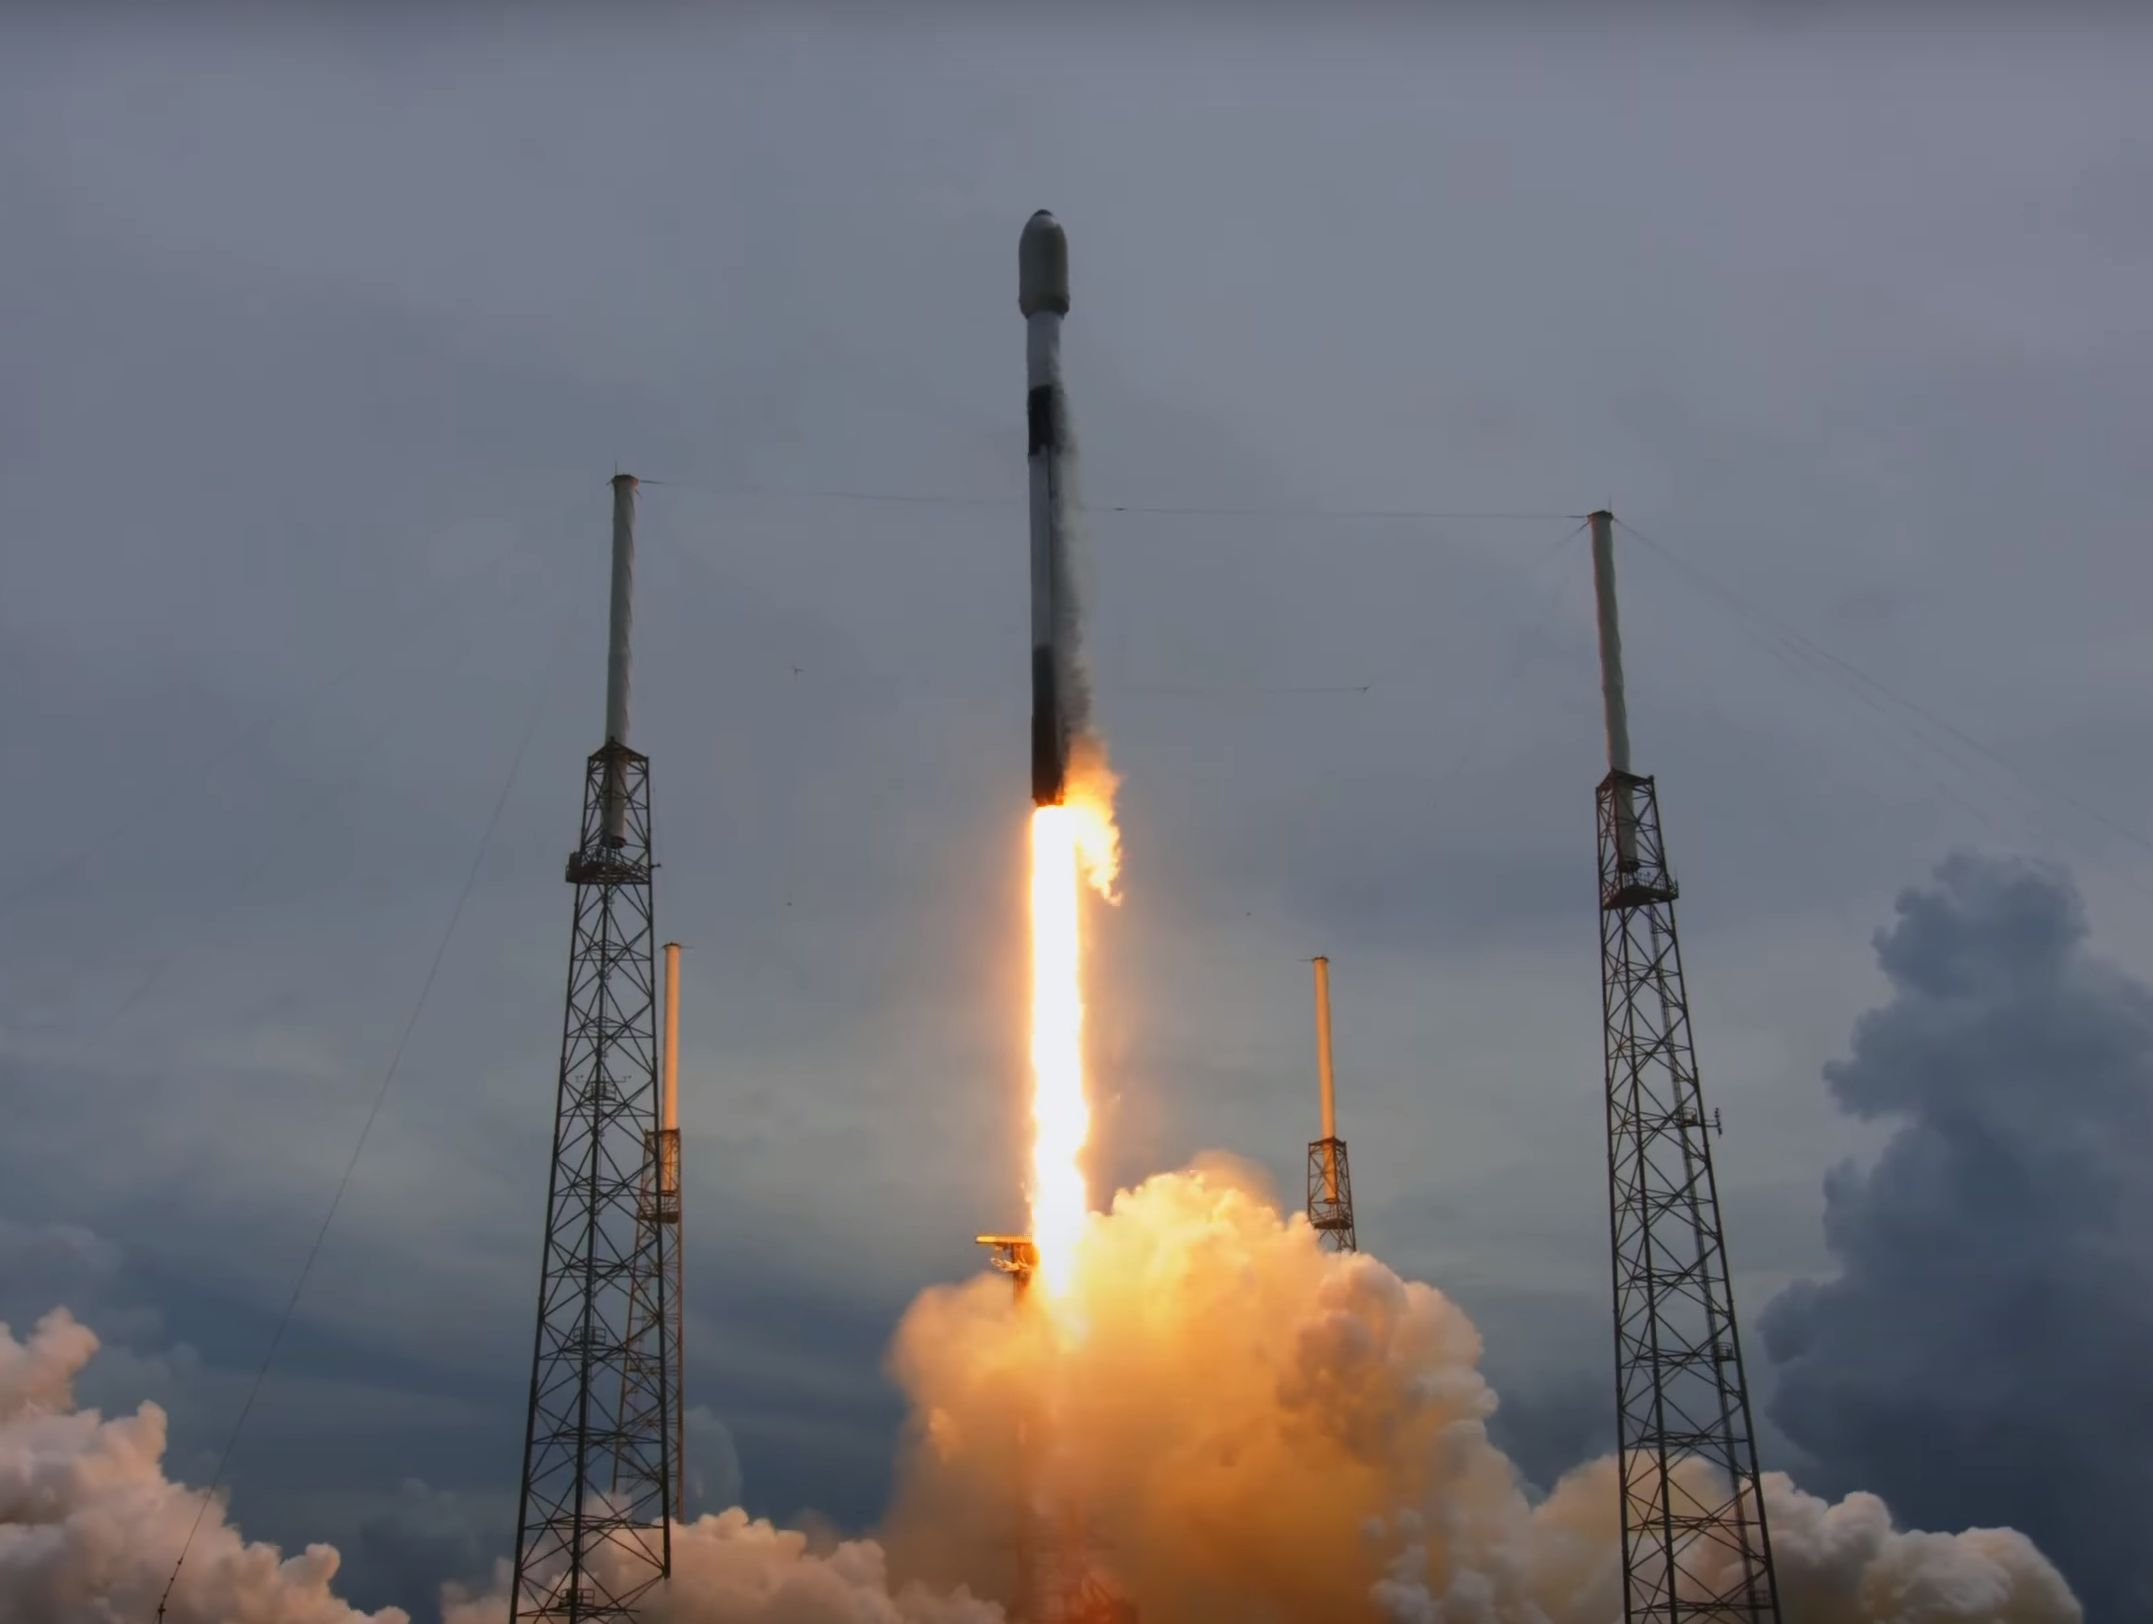 Falcon 9 Transporter-2 liftoff. Image courtesy: SpaceX webcast.